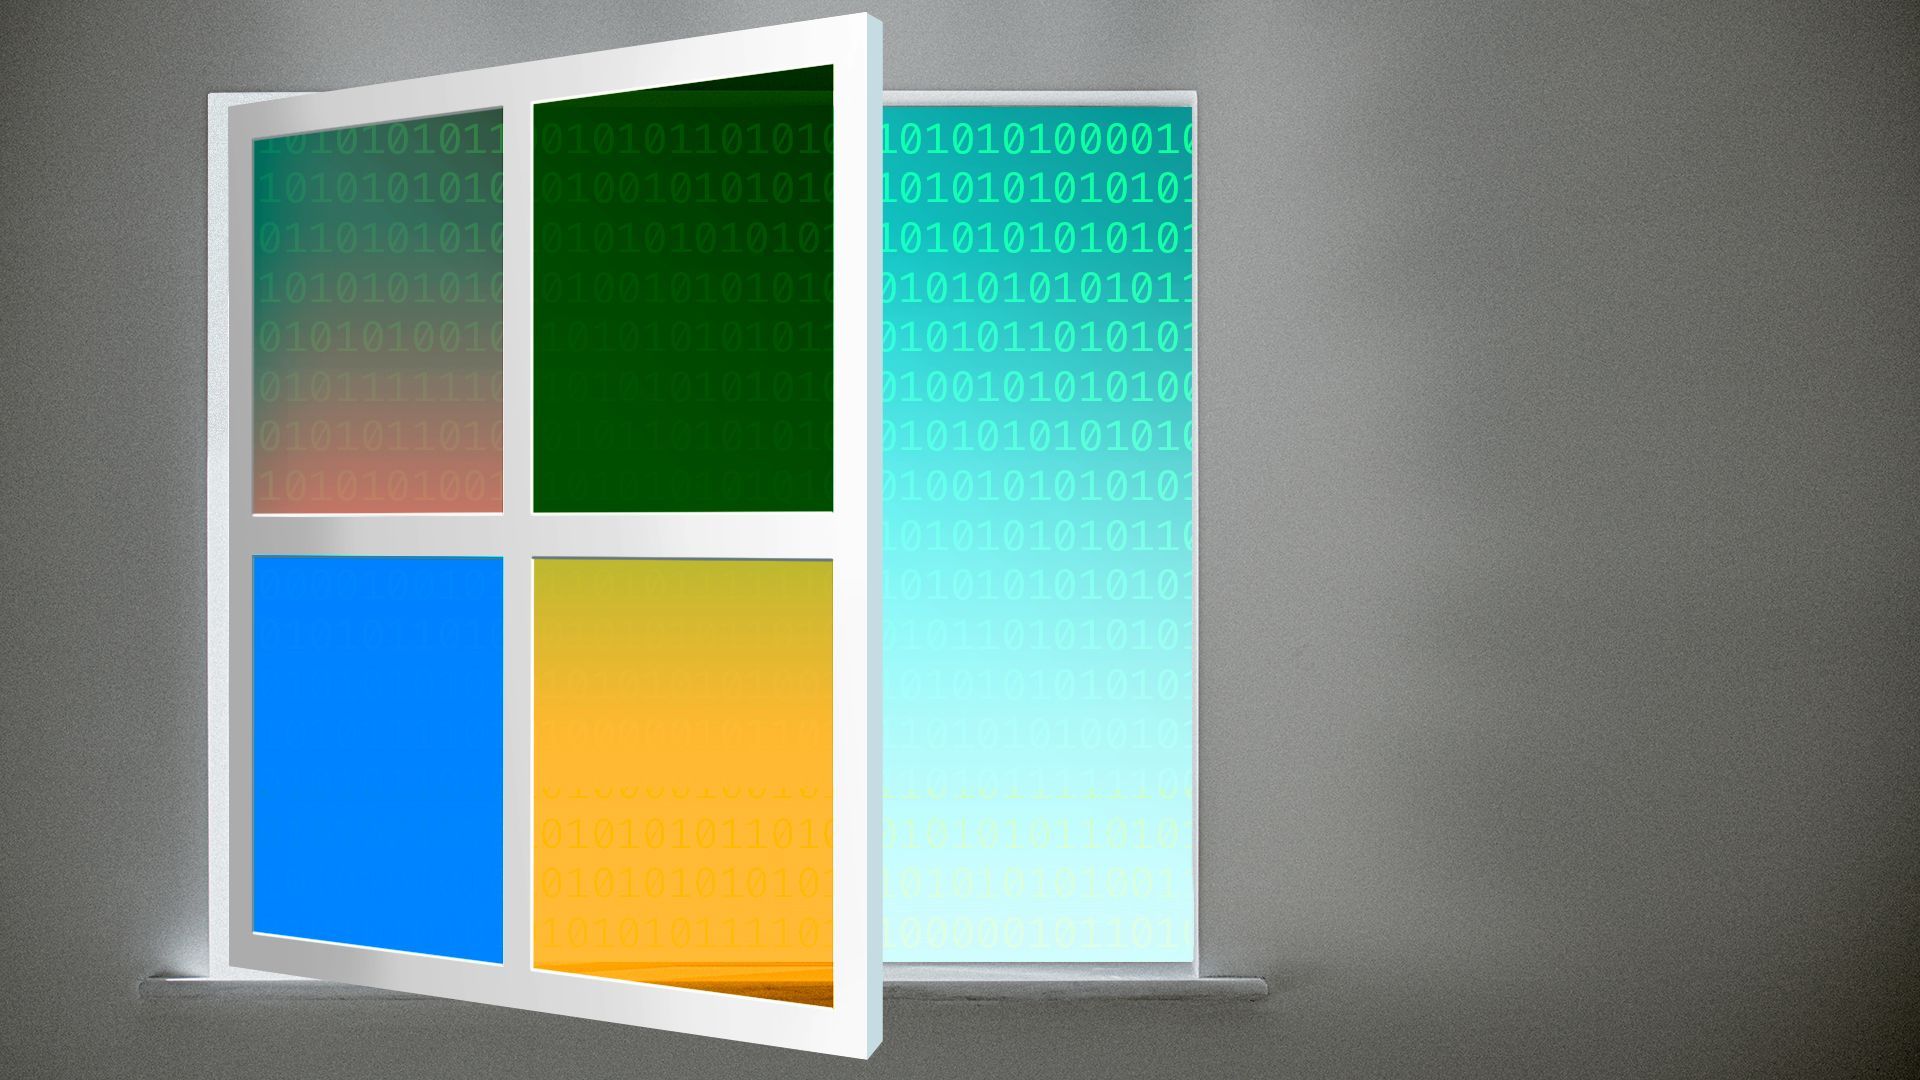 Illustration of an open house window with panes resembling the Microsoft Windows logo. Outside the open window is a bright blue sky filled with glowing binary code.